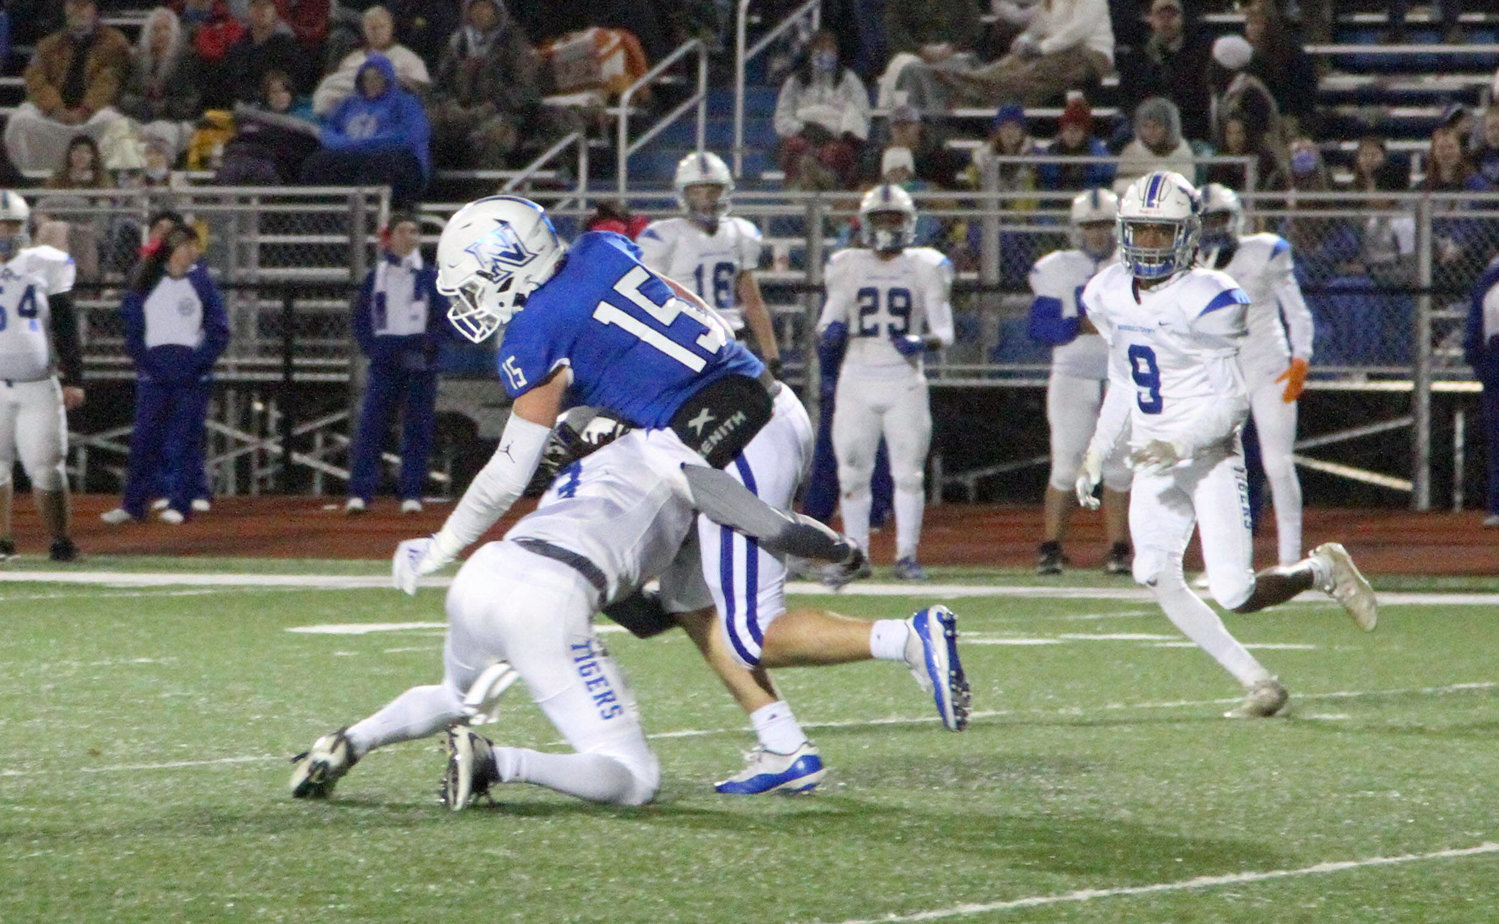 Devonte Davis executes an open field tackle on the Nolensville’s Brayden Rose (15) during the Tigers’ 35-28 loss on Friday night.